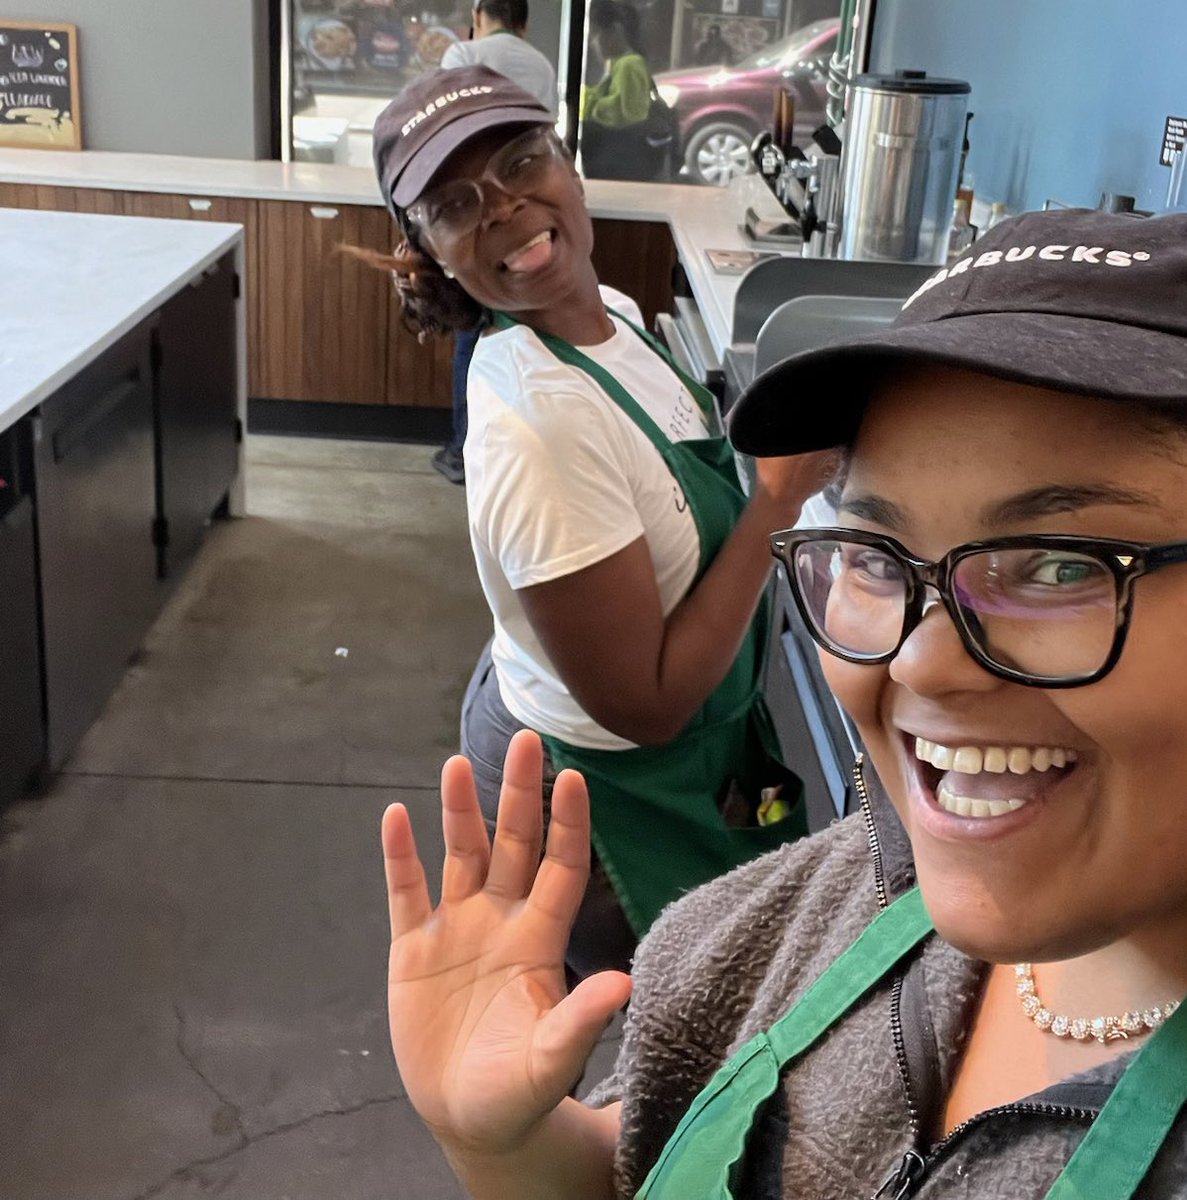 Welcome welcome to workers at the Hoyt-Schermerhorn Starbucks in downtown Brooklyn who filed for a union election yesterday!! They were joined by another store in Port Jefferson, Long Island. Stay tuned, more to come!